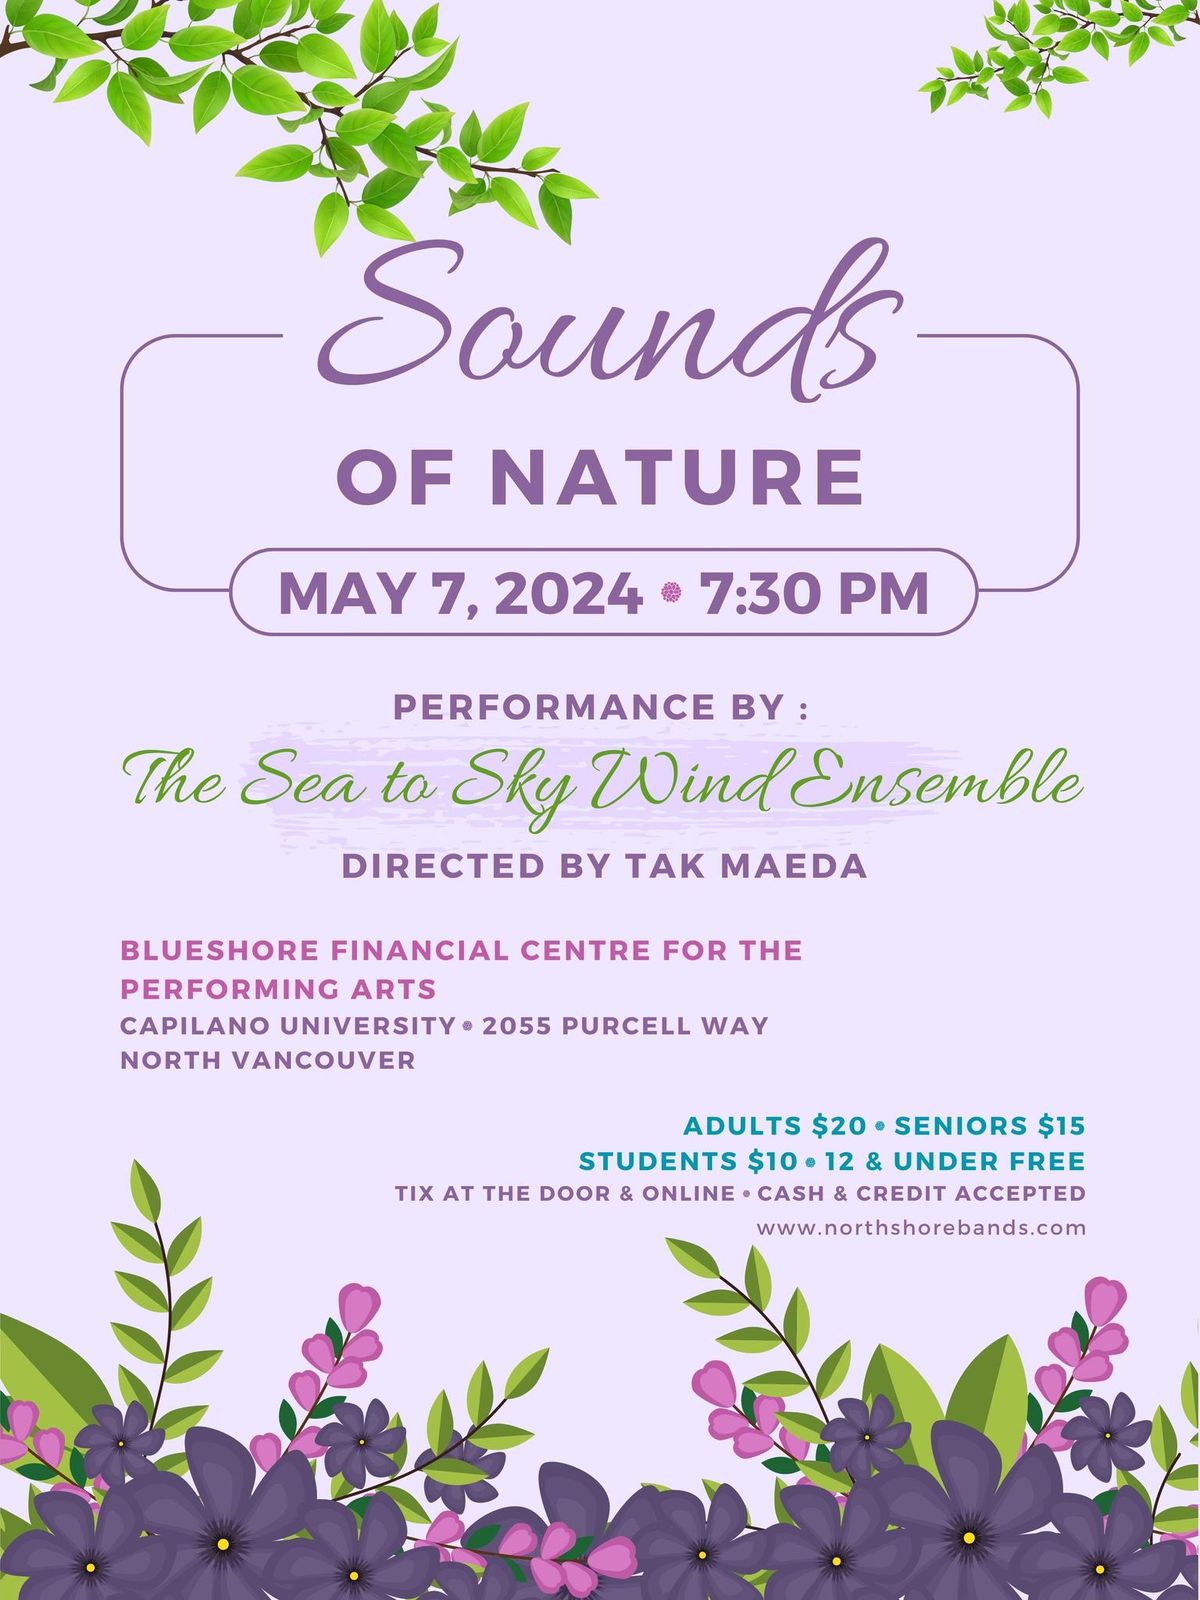 Spring Concert - Sounds of Nature